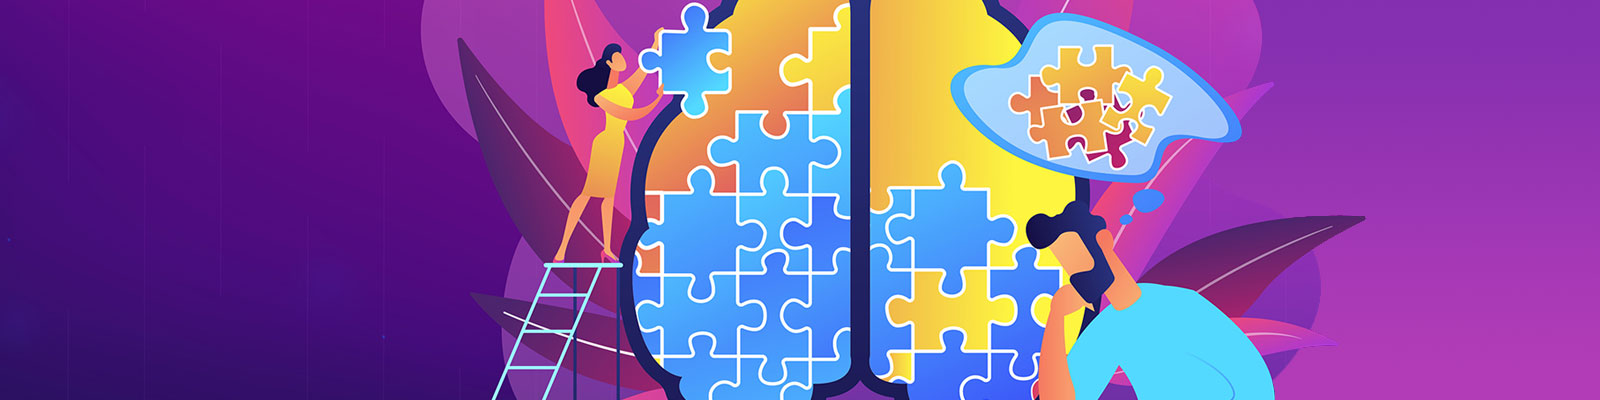 illustration, woman on ladder fitting puzzle pieces into a brain